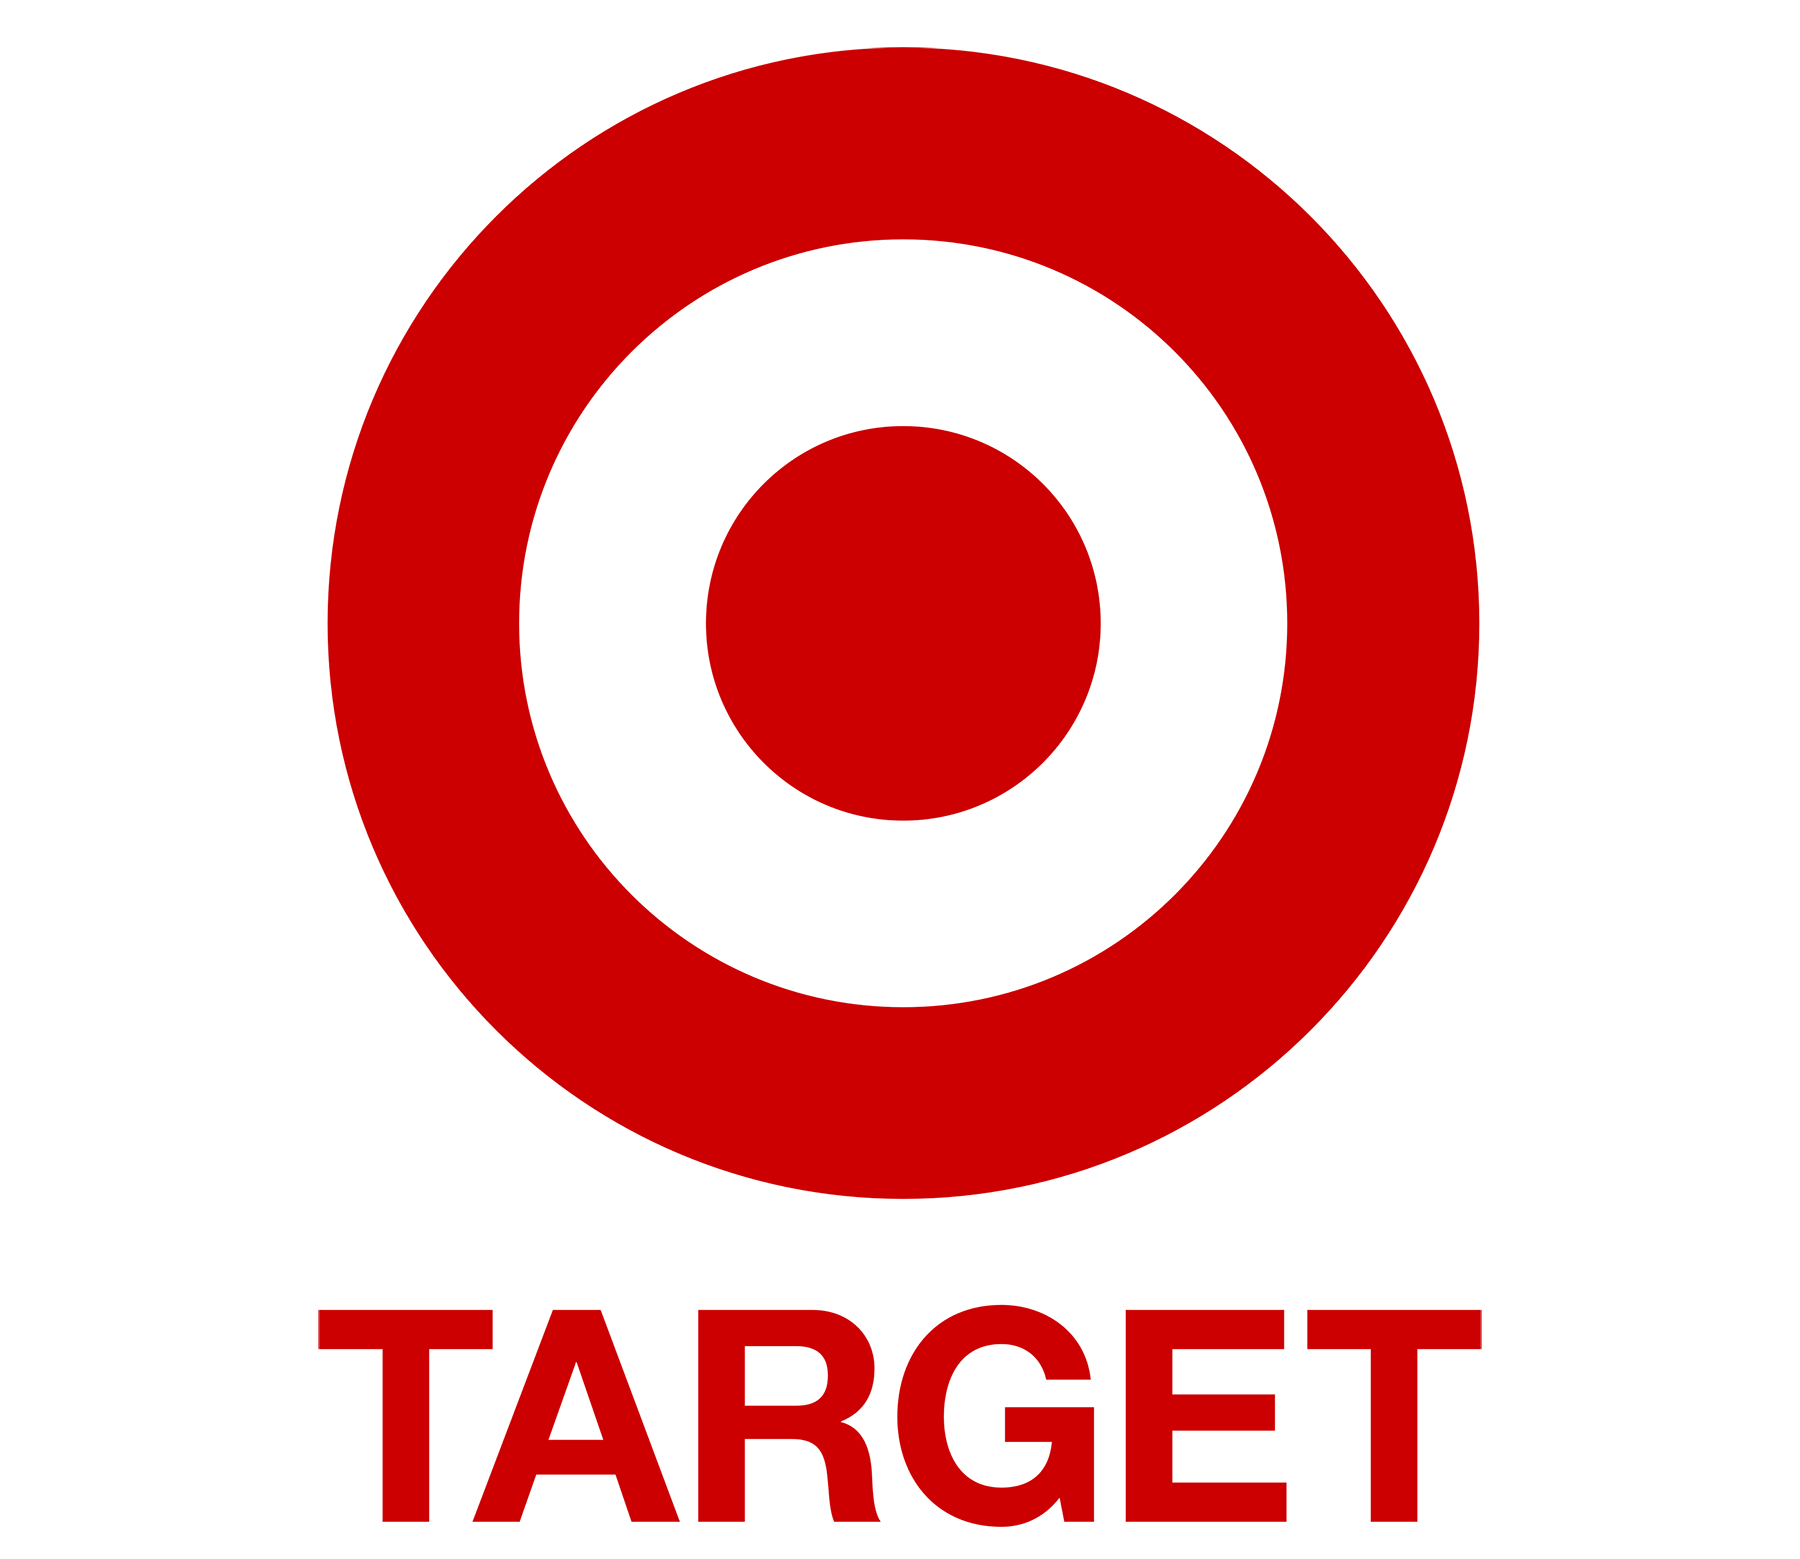 Metaphor Logo - Meaning Target logo and symbol | history and evolution